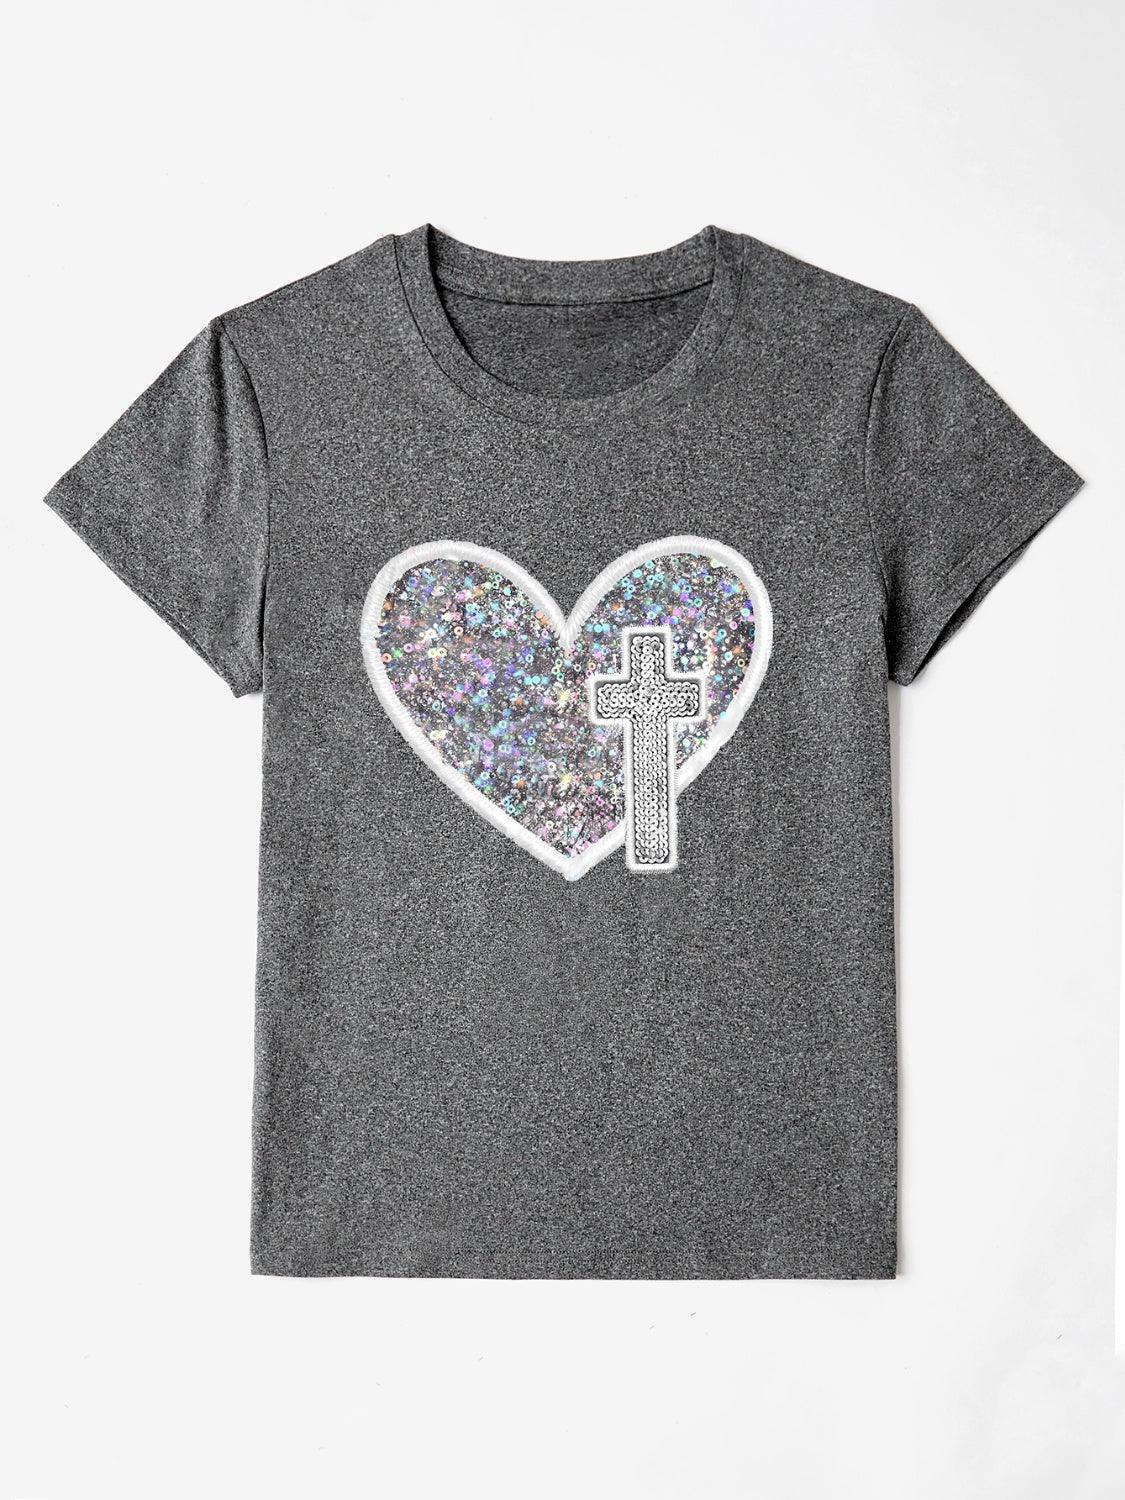 Sequin Heart Round Neck Short Sleeve T-Shirt - Anchored Feather Boutique